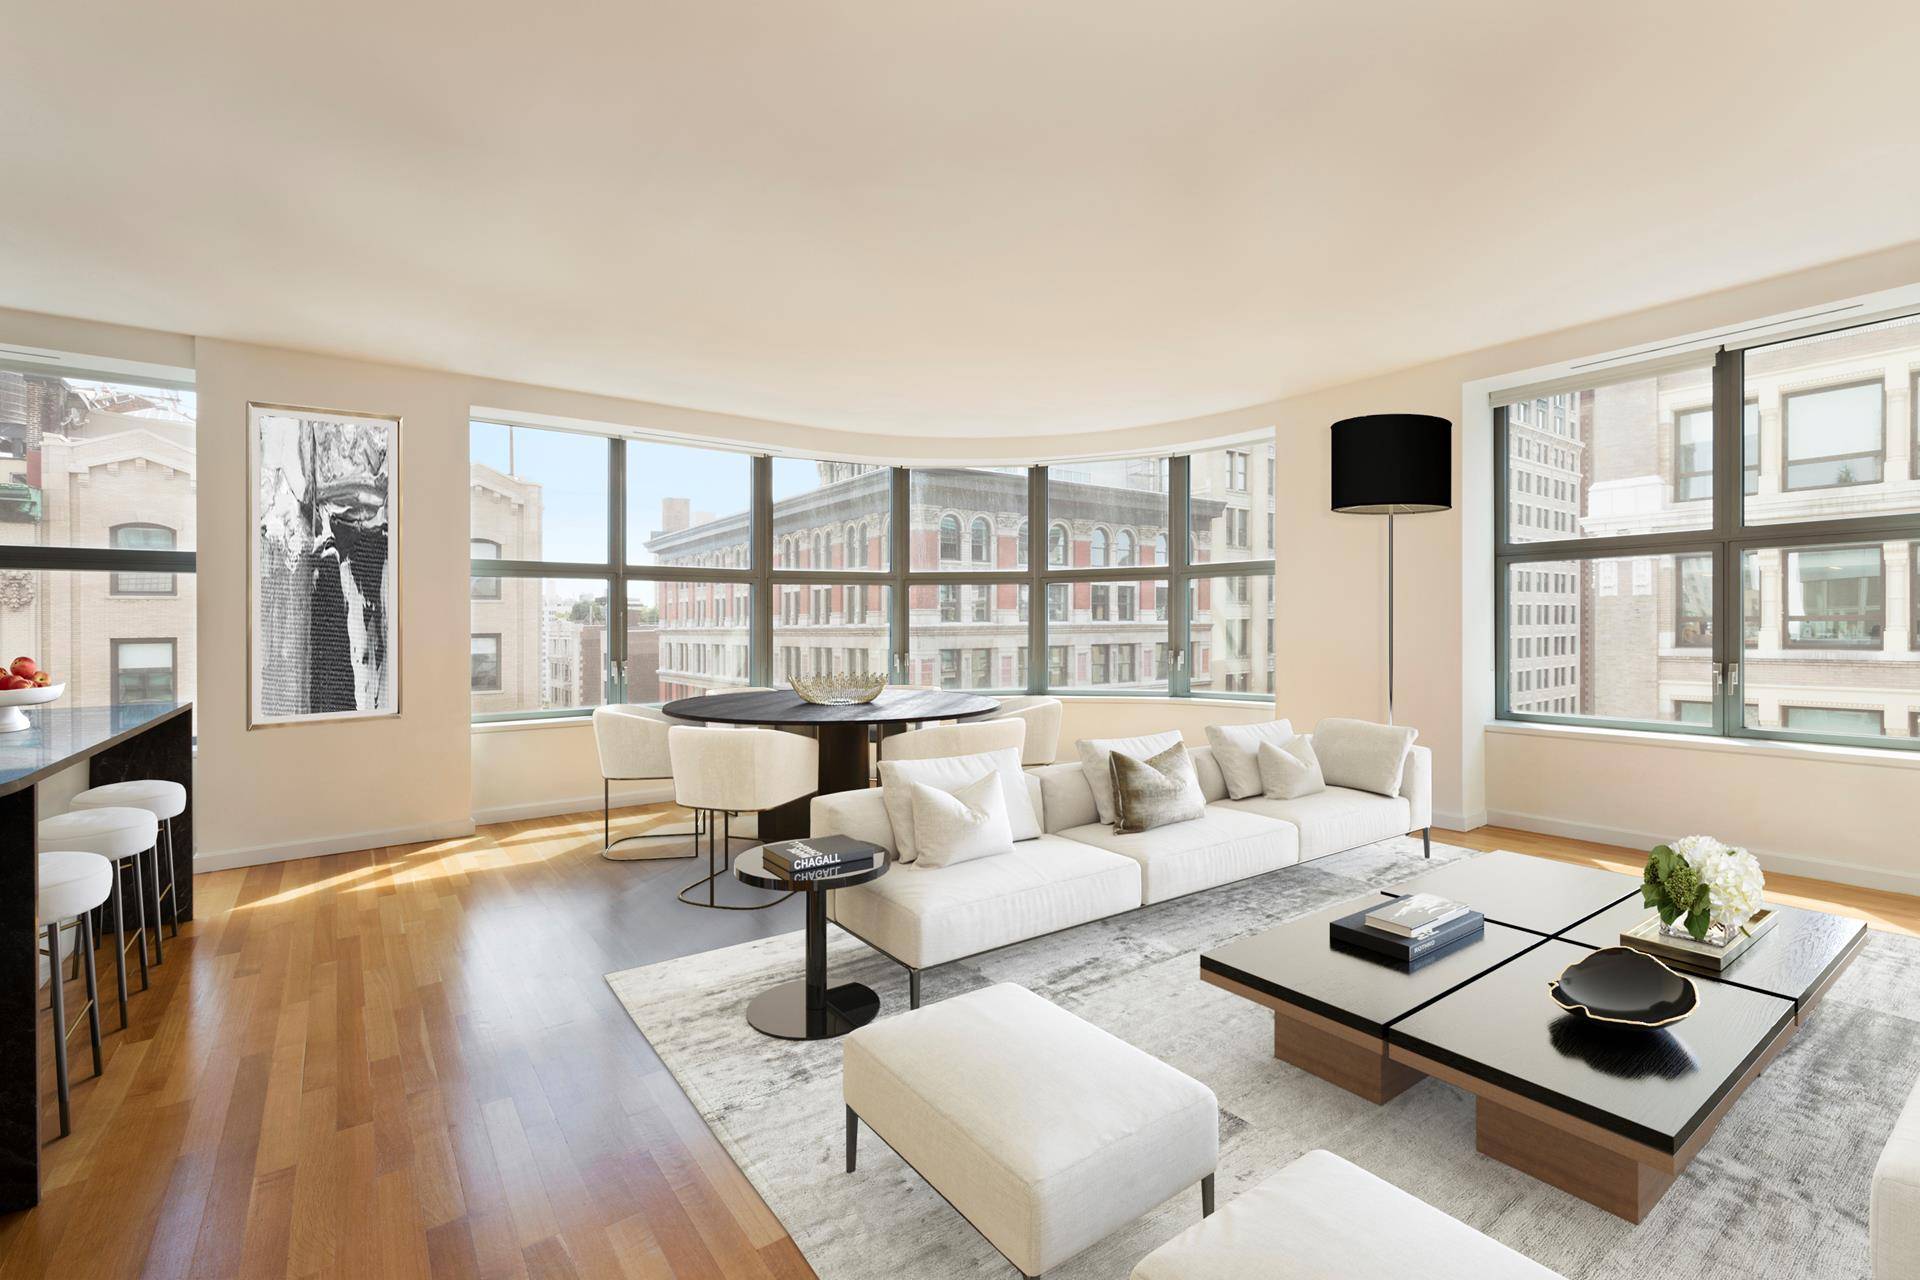 Residence 14AThis stunning 2 Bedroom, 2 Bathroom home boasts hardwood floors throughout with a sun drenched, southeast facing view from a curved collective wall of windows overlooking fabulous Park Avenue.